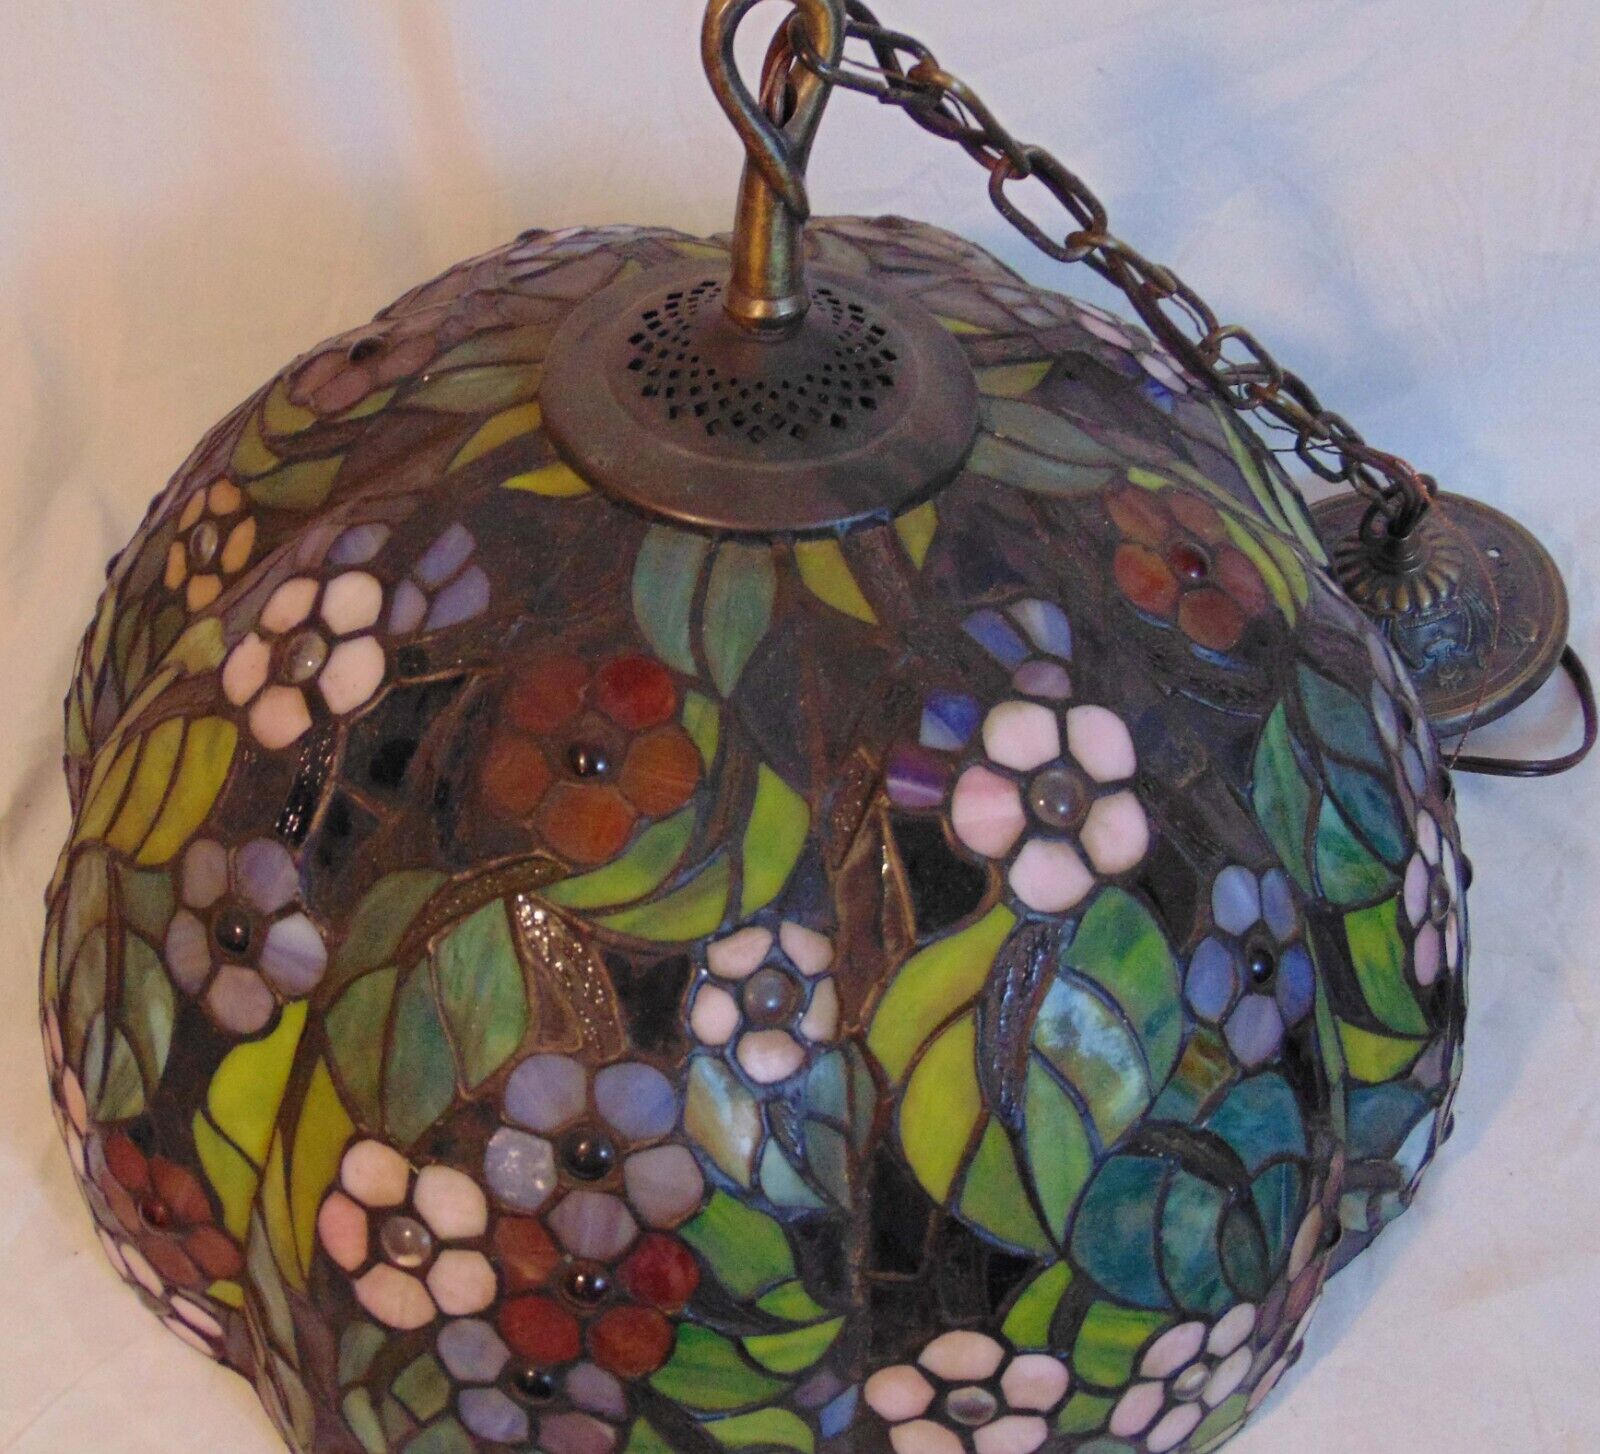 DALE Tiffany Leaded Glass Chandelier Dome Lamp Light Fixture Flowers Signed